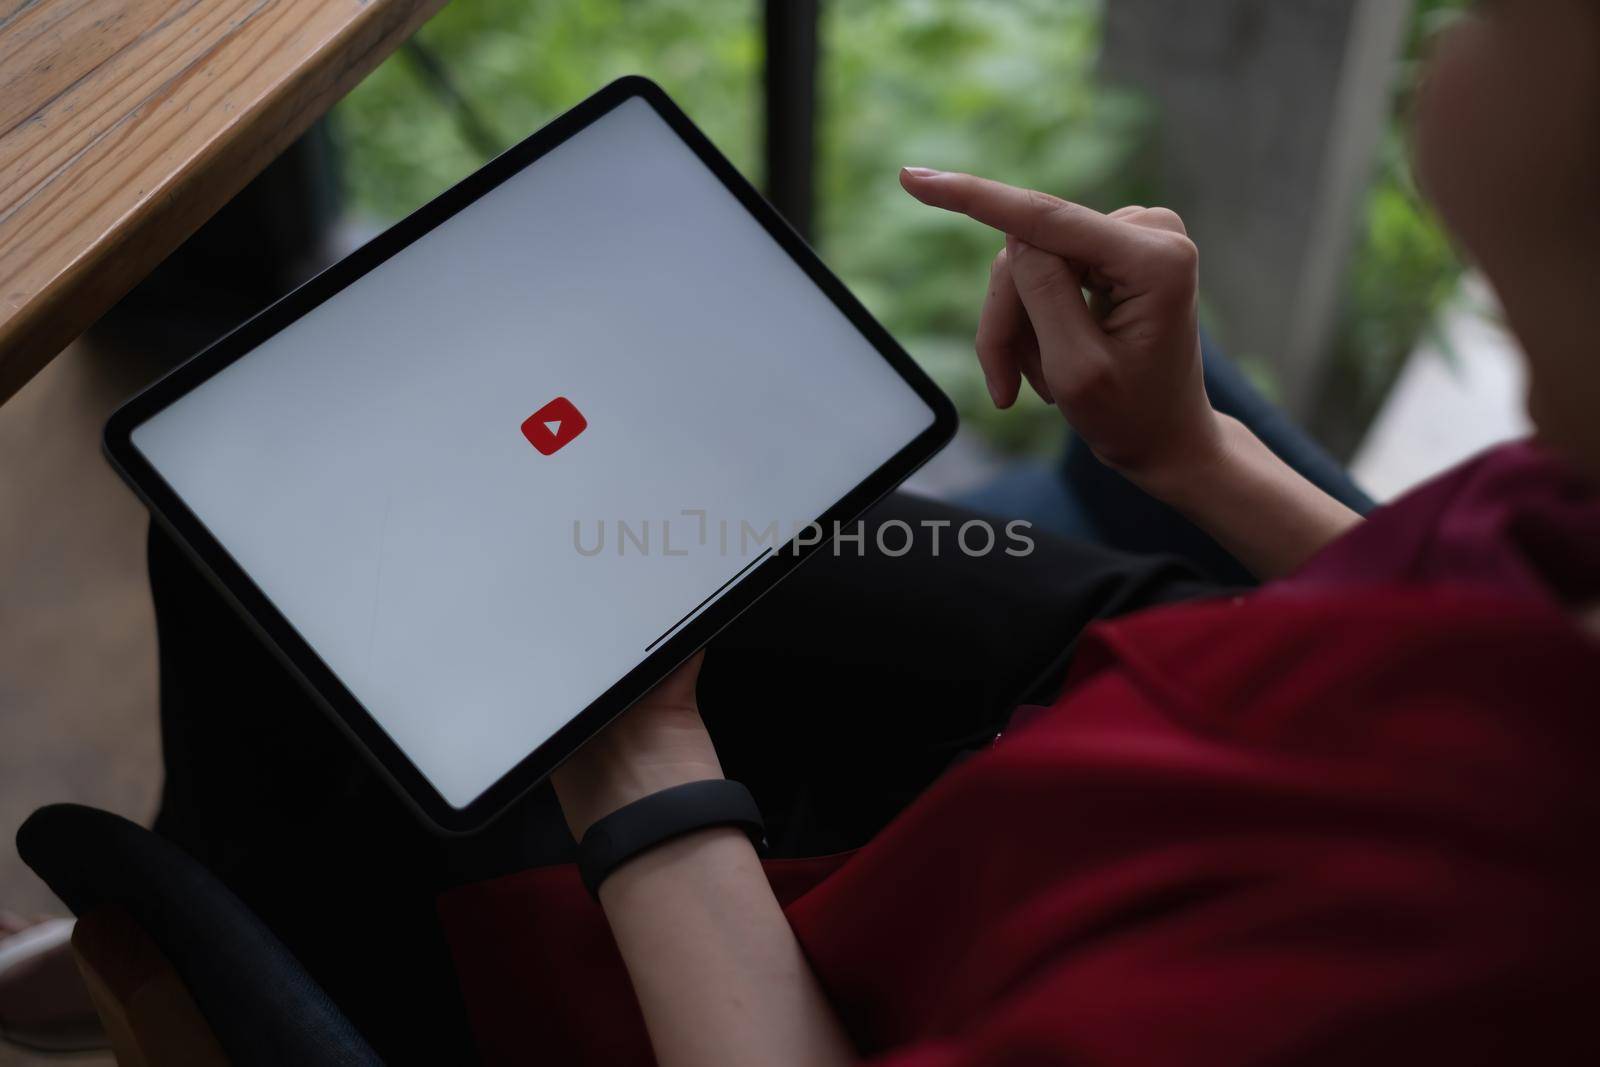 Chiang mai, Thailand - AUG 09, 2021 : Woman using a tablet to connect to YouTube Premium. YouTube is a video-sharing website by google.